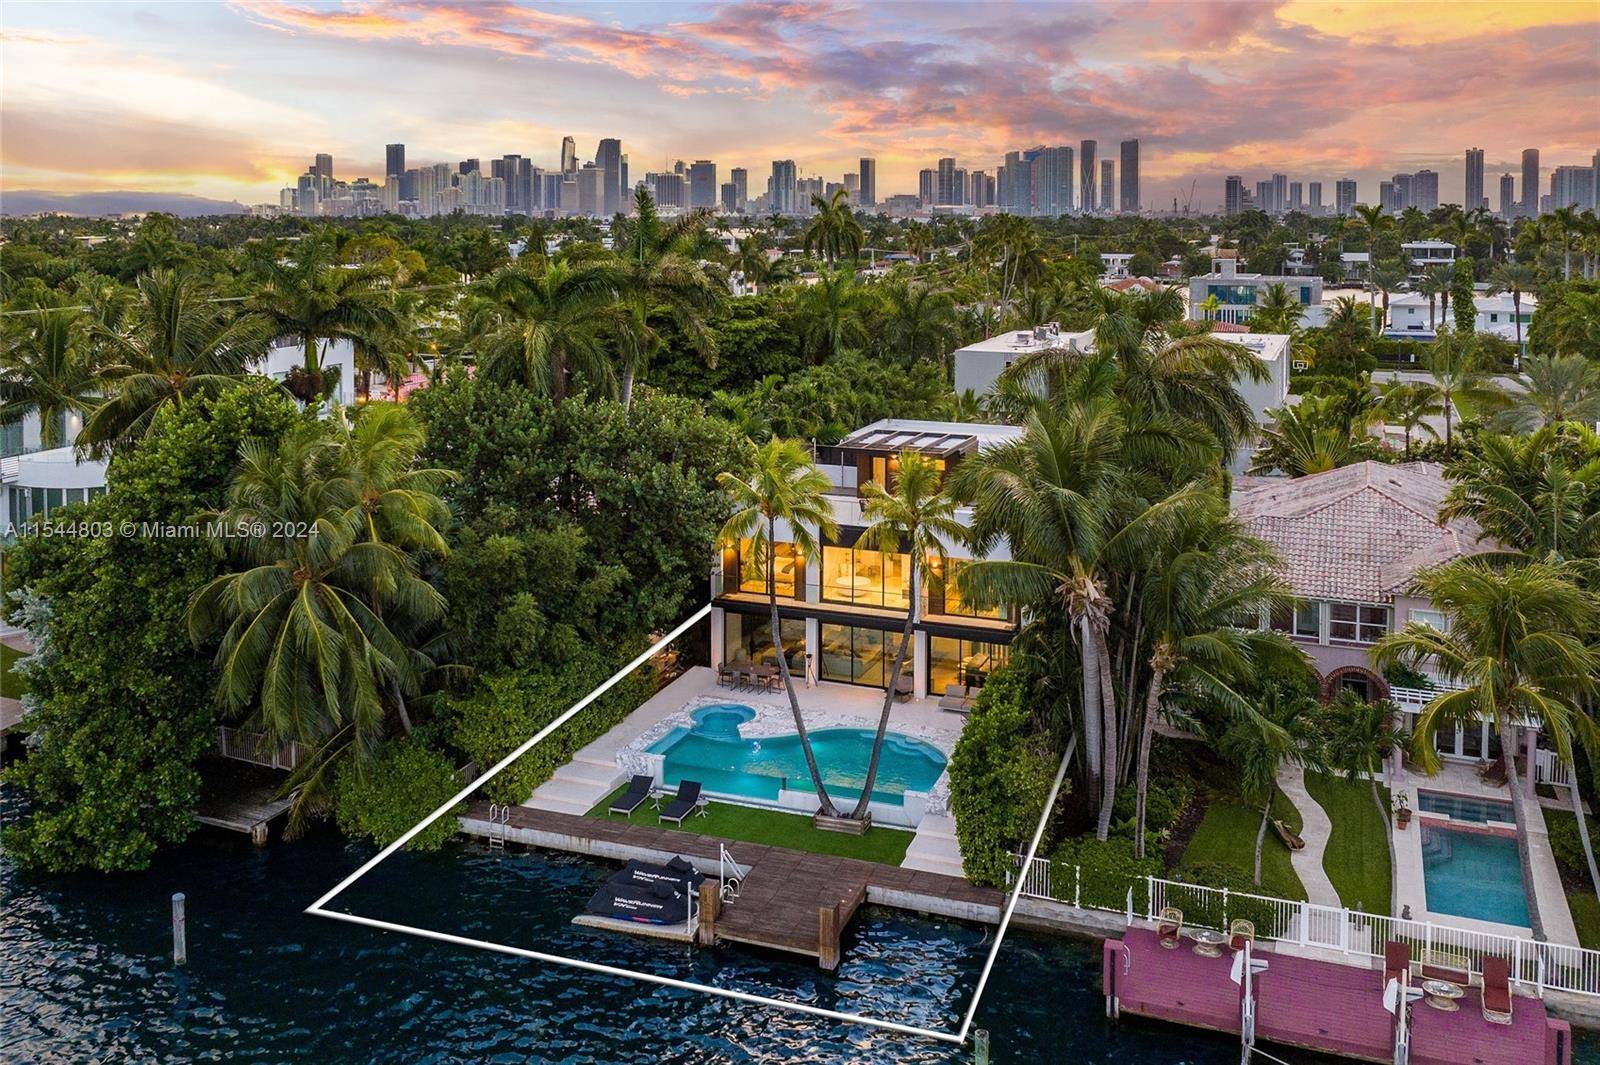 Experience the sheer bliss of thoughtful living in this contemporary masterpiece located on the Venetian Islands.